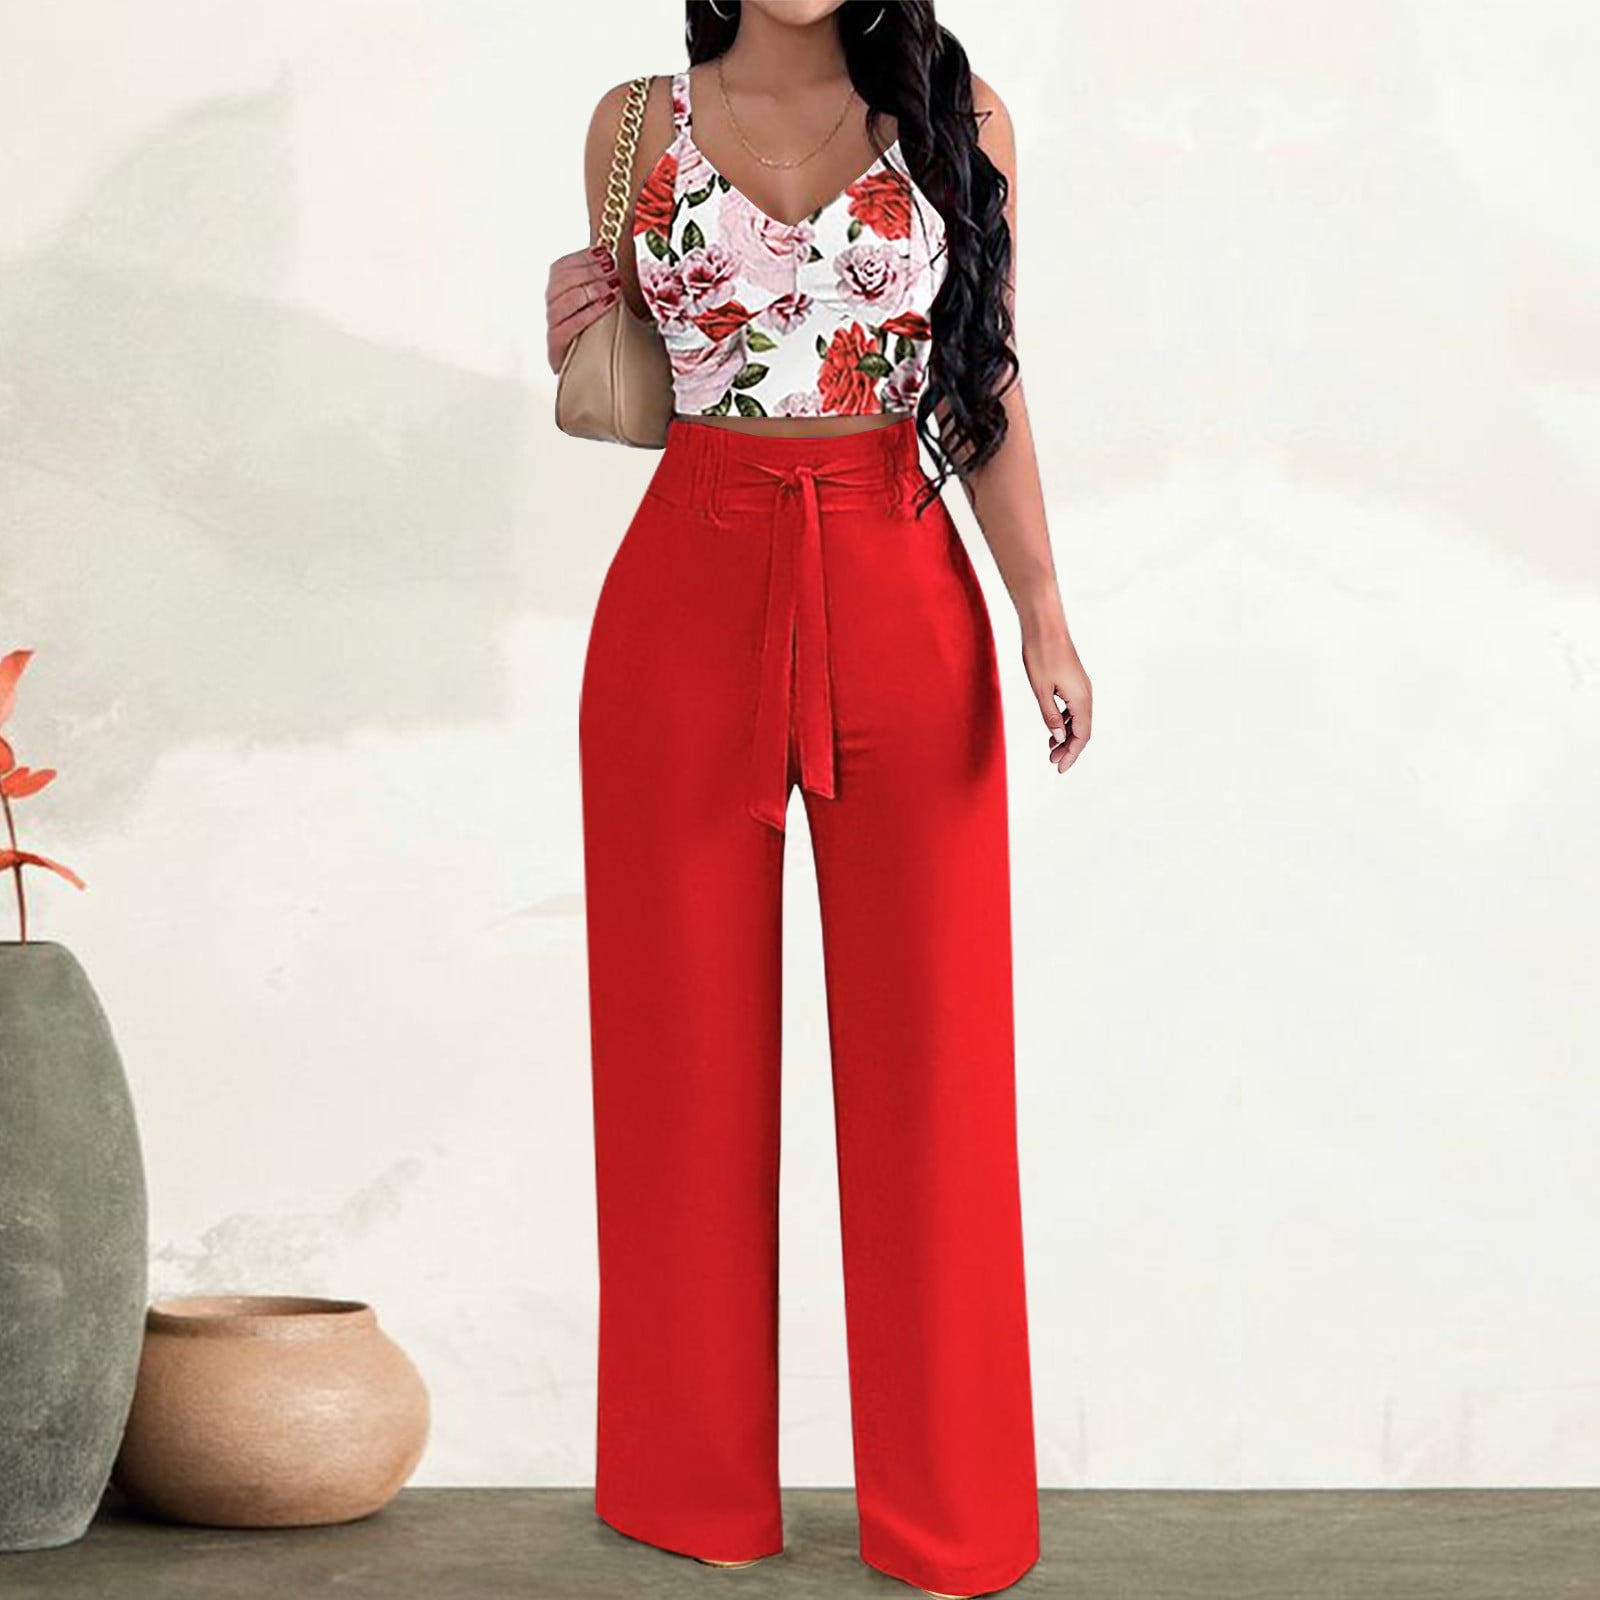 Red Palazzo Pants With Belt By Estonished | EST-GJ-279 | Cilory.com